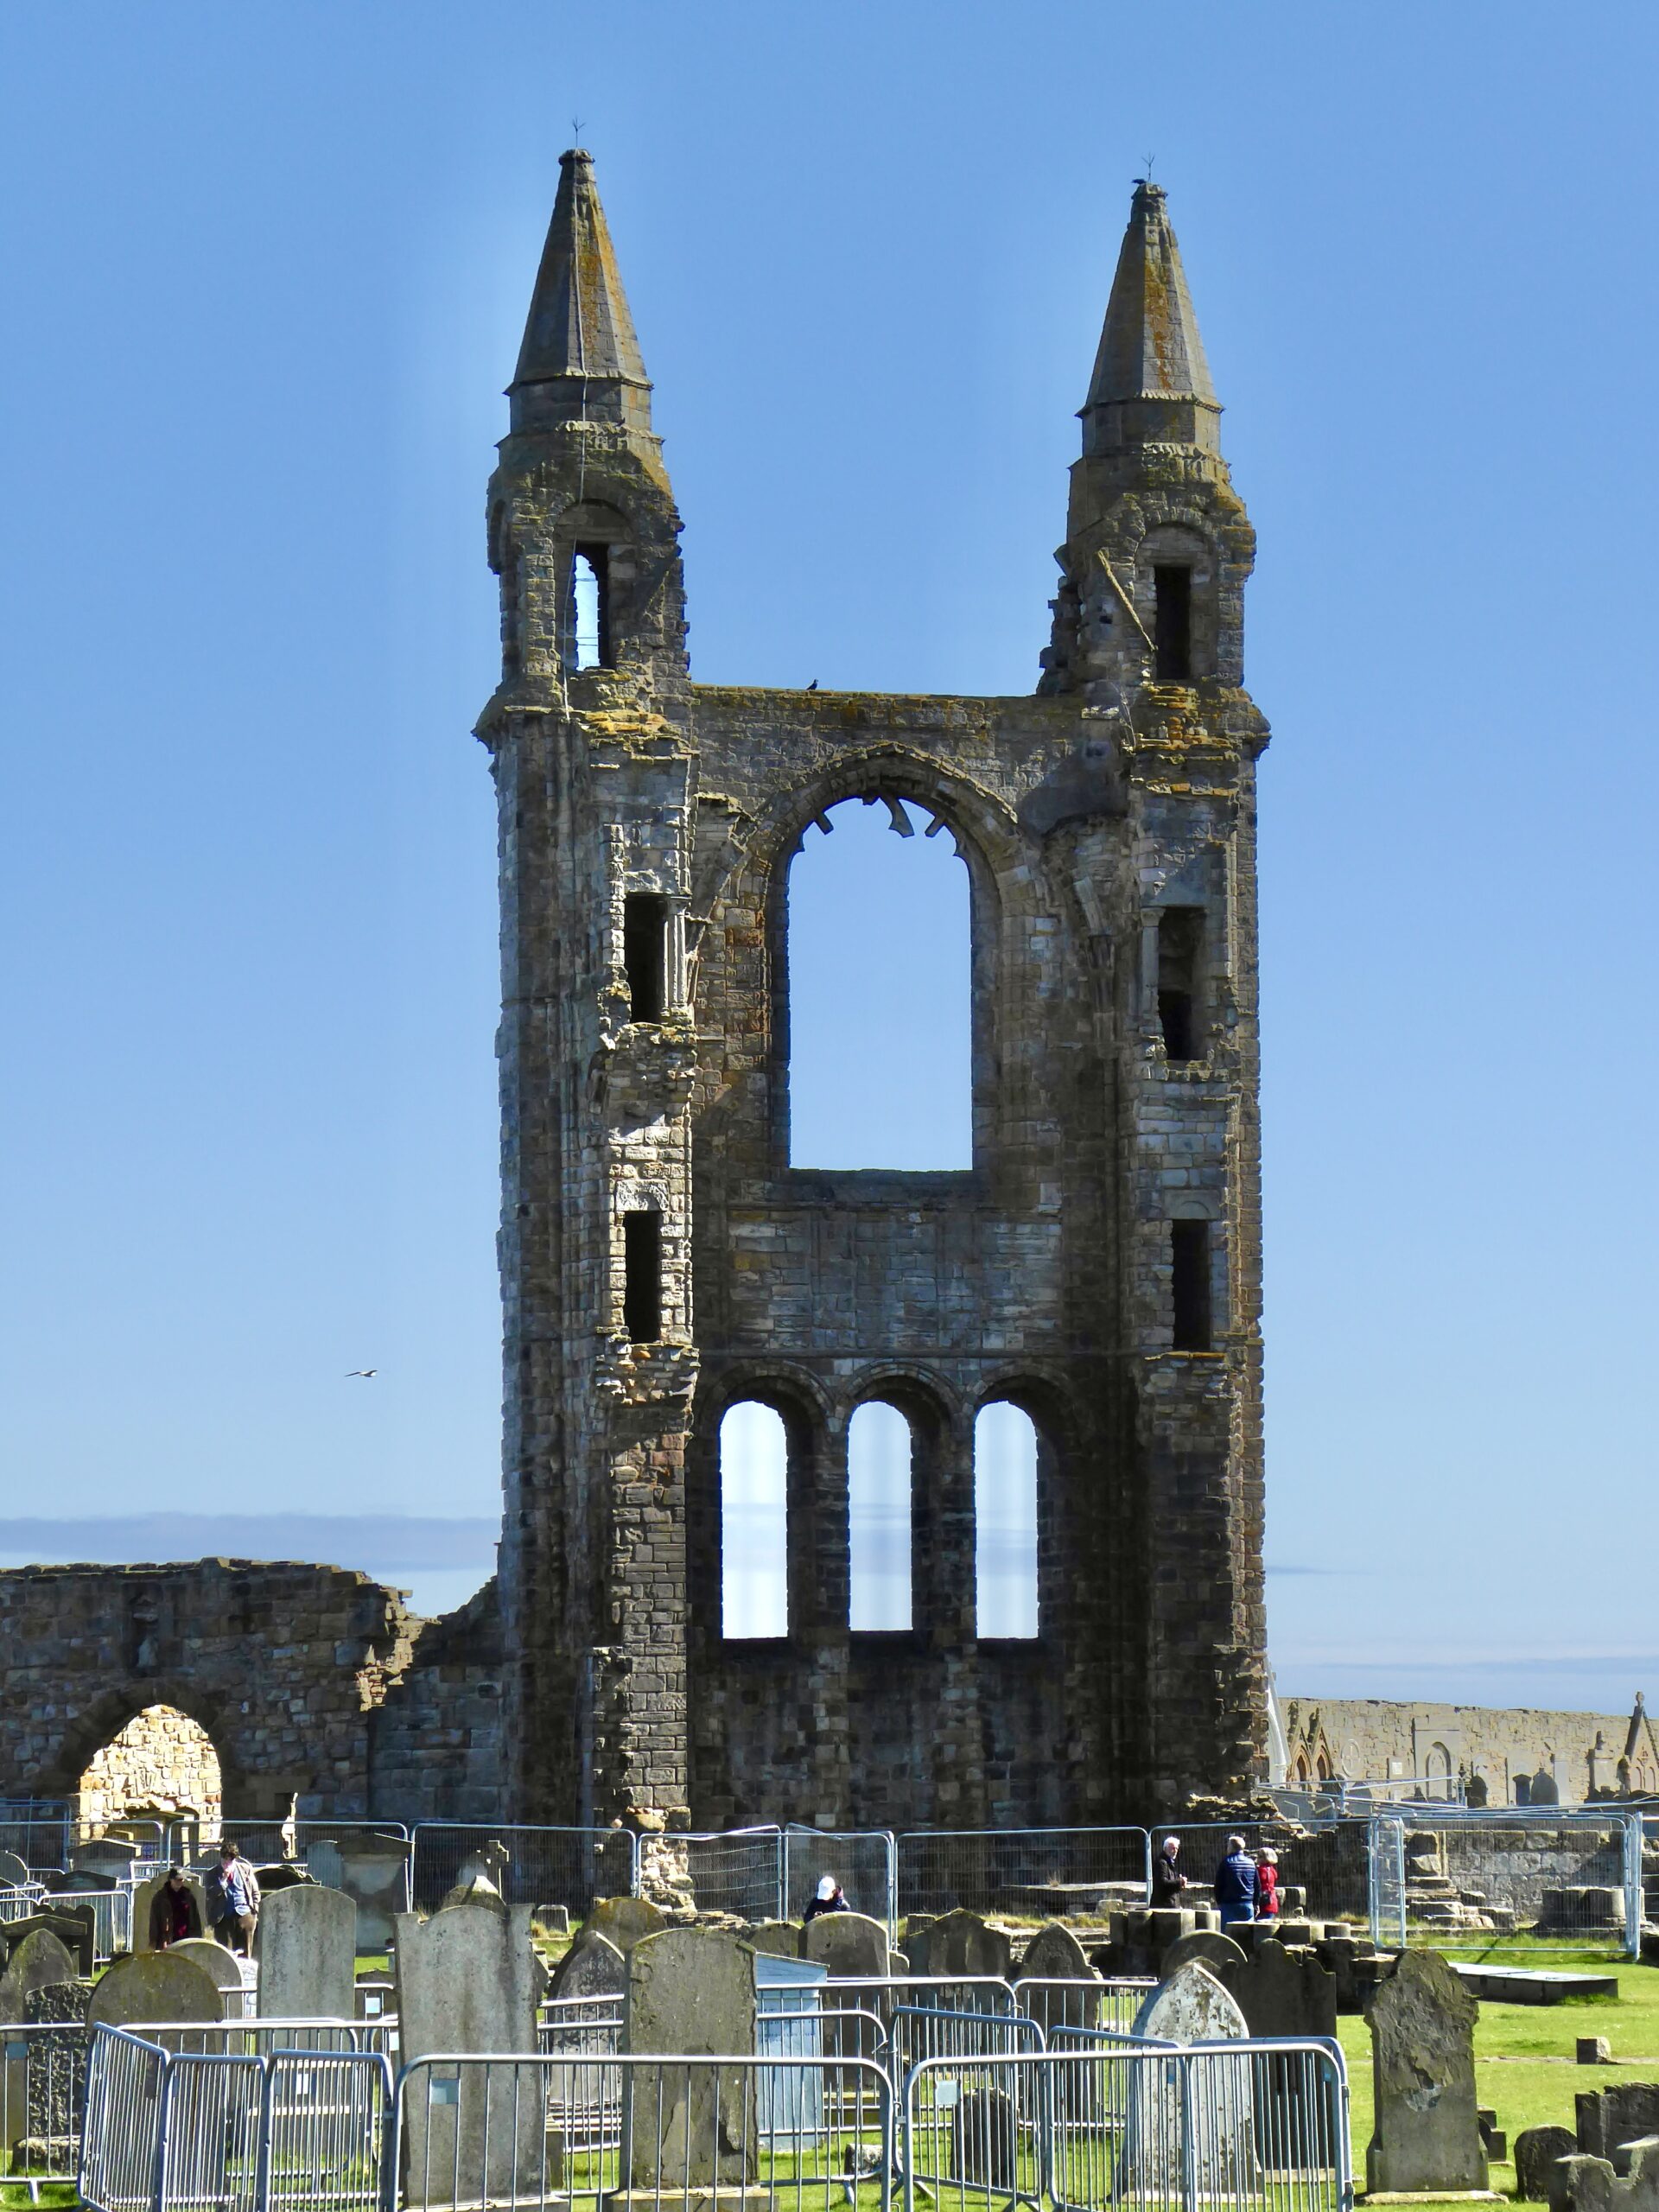 Ruins of the Cathedral of St Andrews — the east end of the nave, two towers